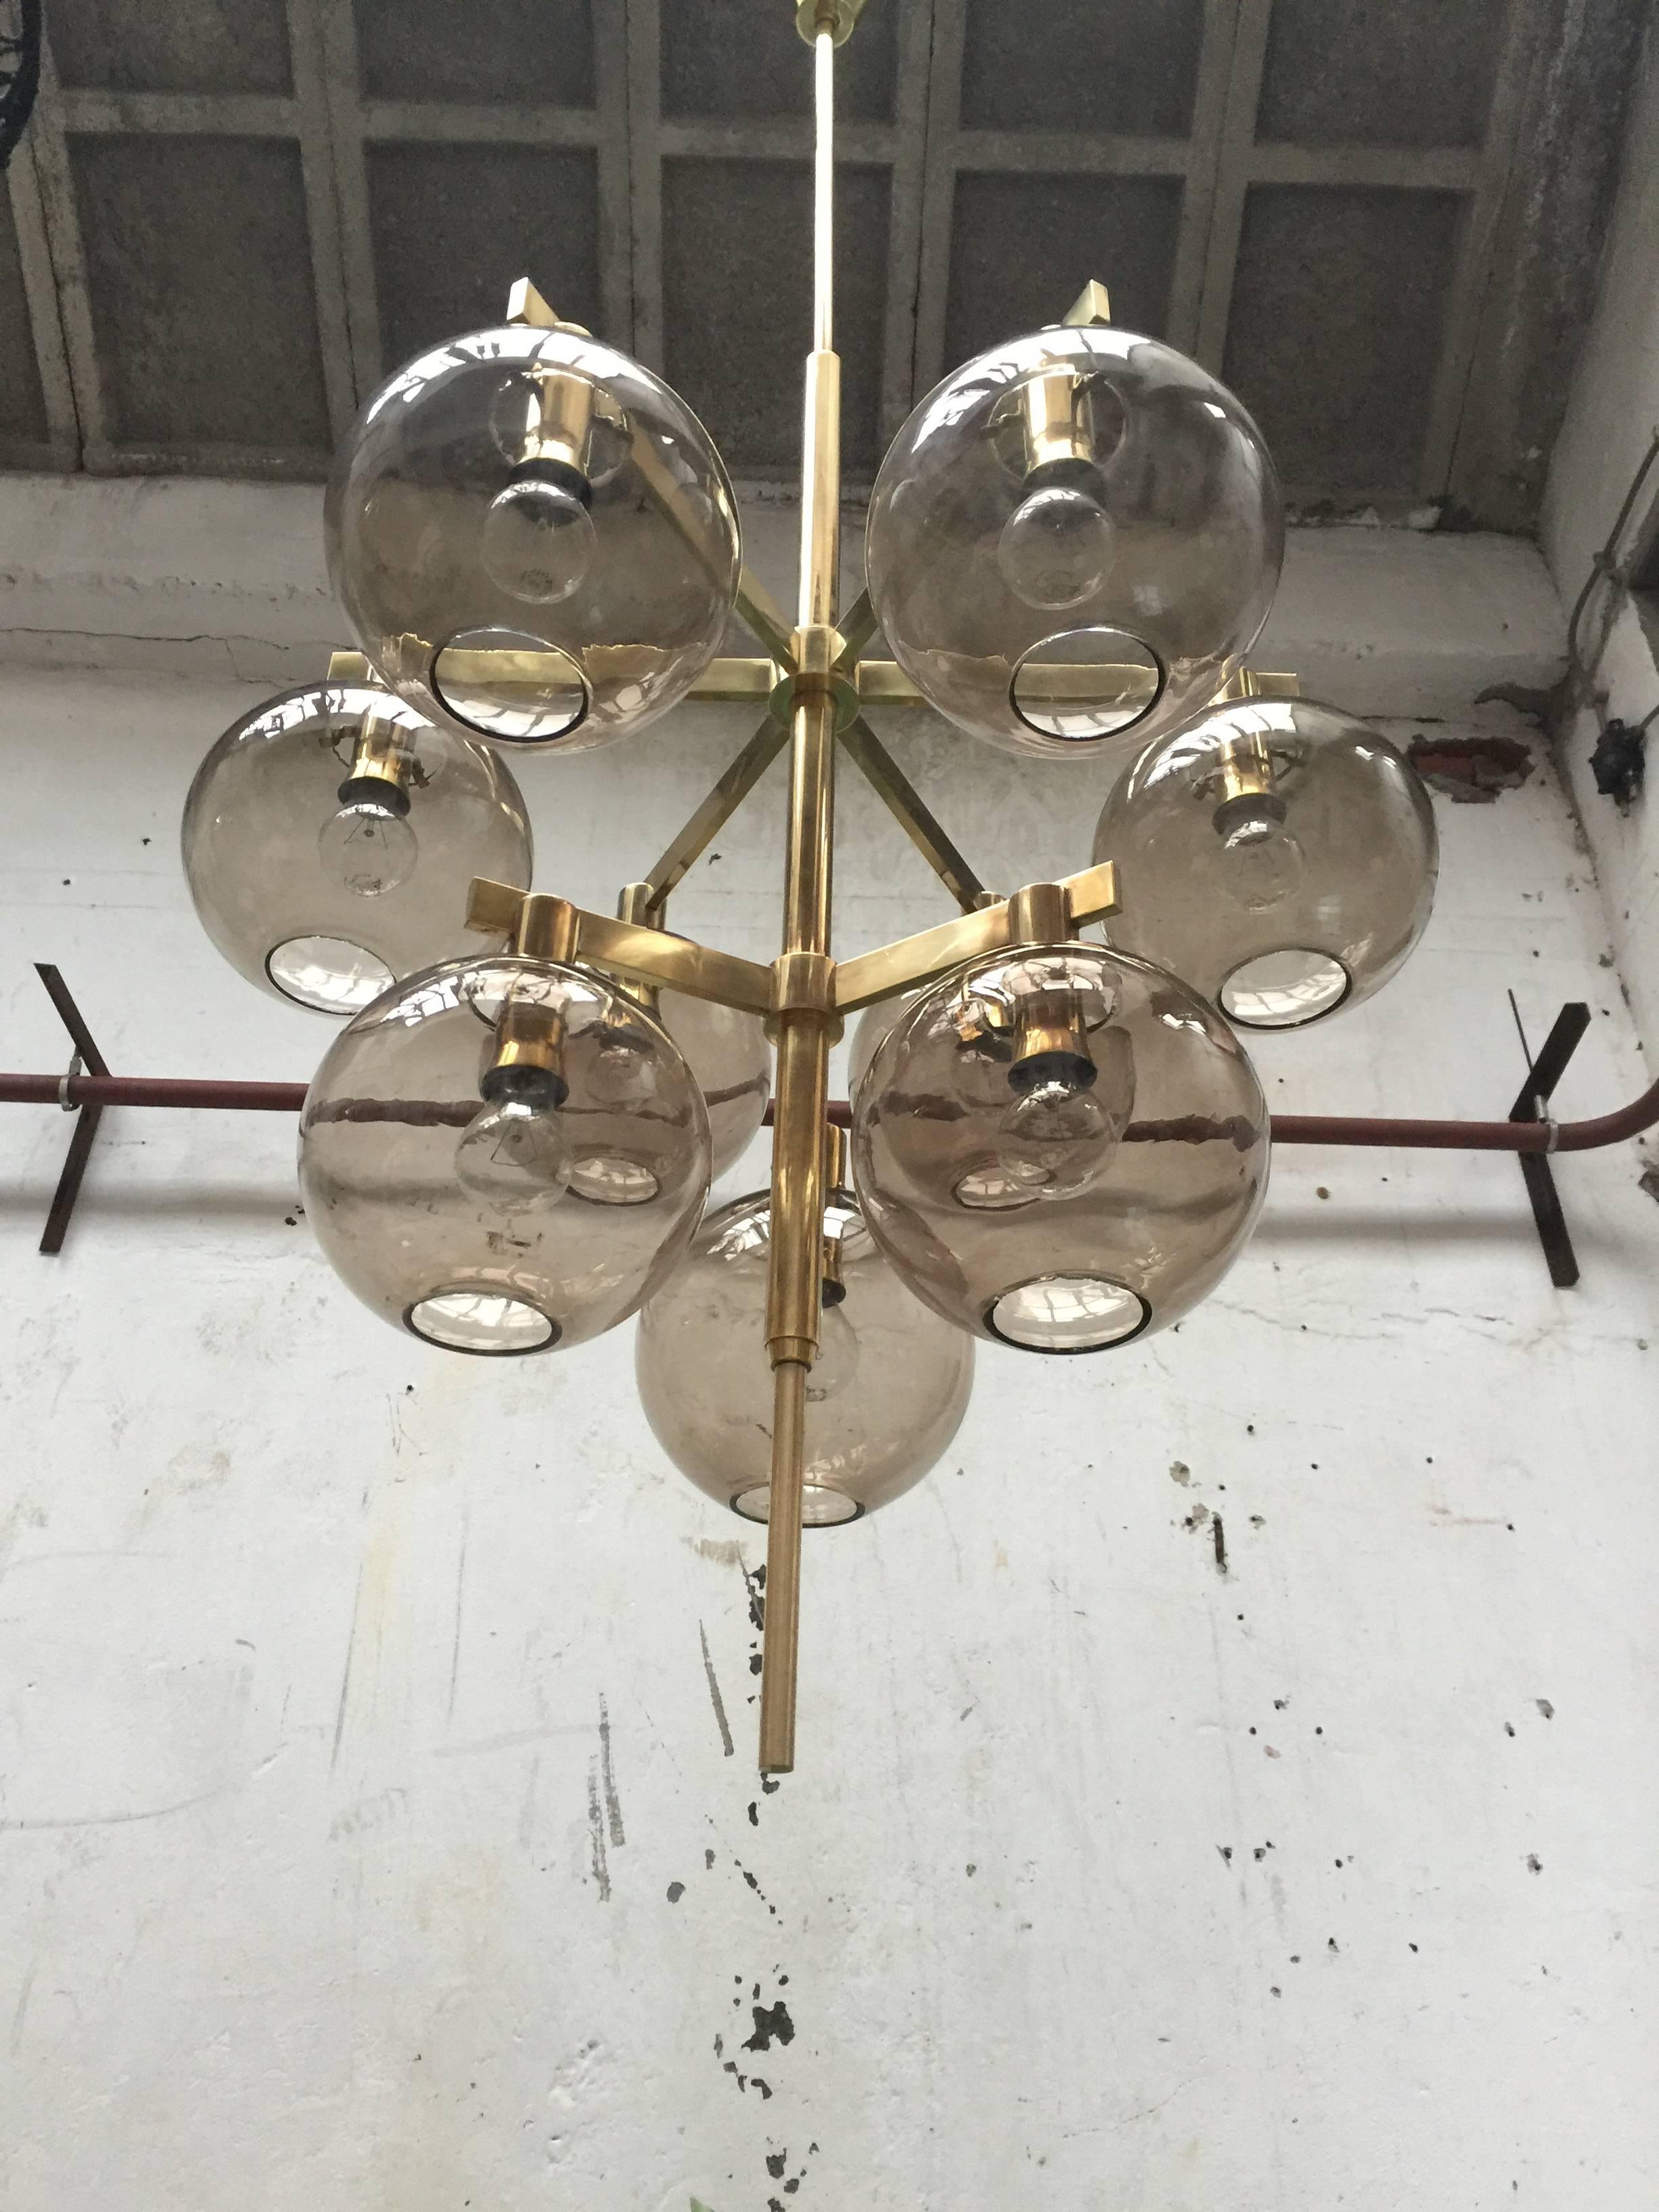 Top Swedish quality chandelier by Hans-Agne Jakobsson Markaryd in brass with nine smoked handblown glass globes.

Hans Agne Jacobson founded his own company in 1951 and produced high quality Scandinavian lighting during his career.

We have two